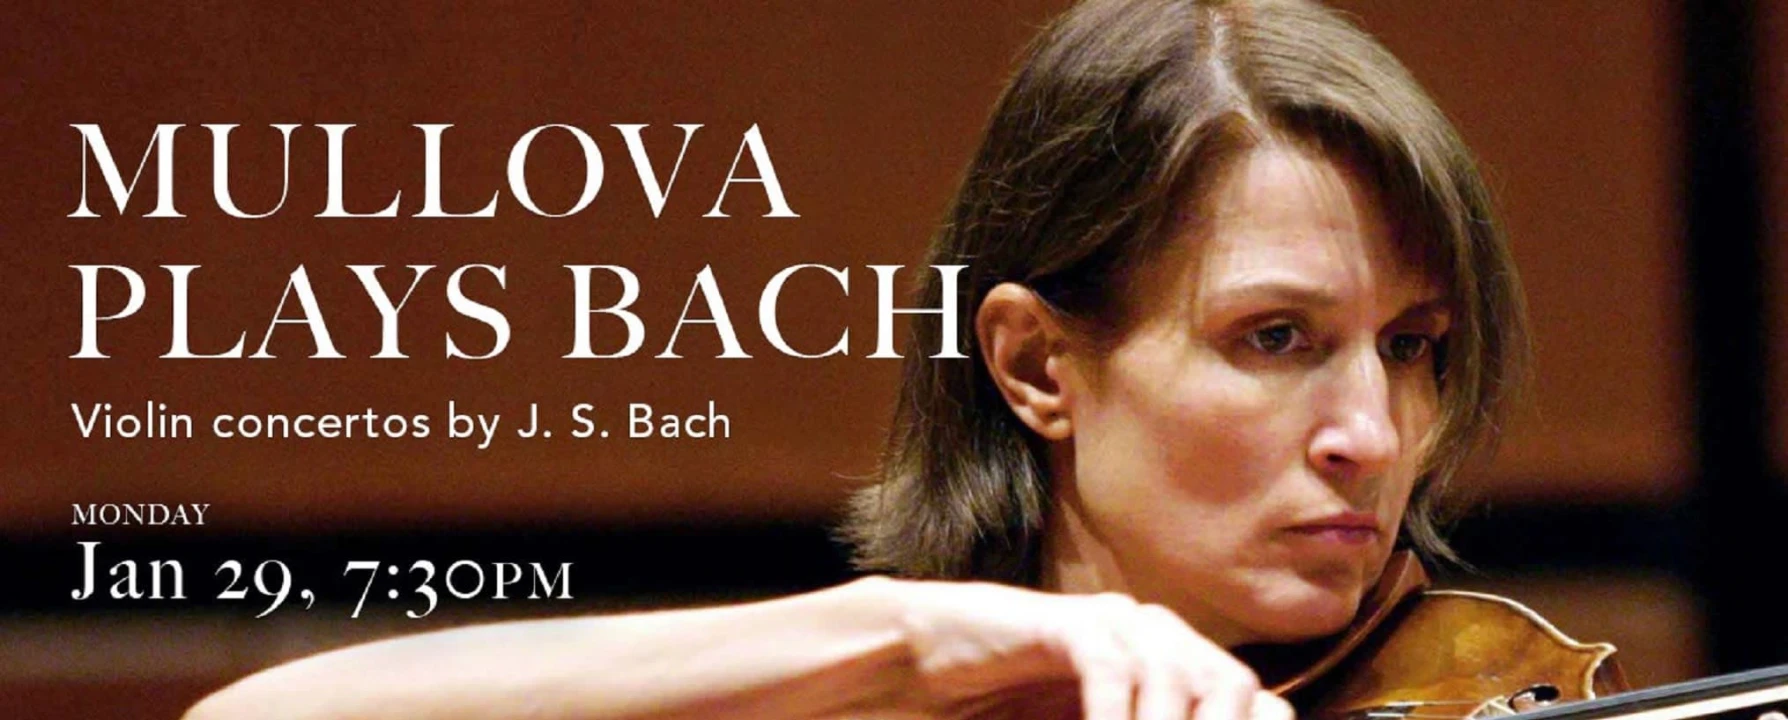 Mullova Plays Bach: Music of the Baroque: What to expect - 1